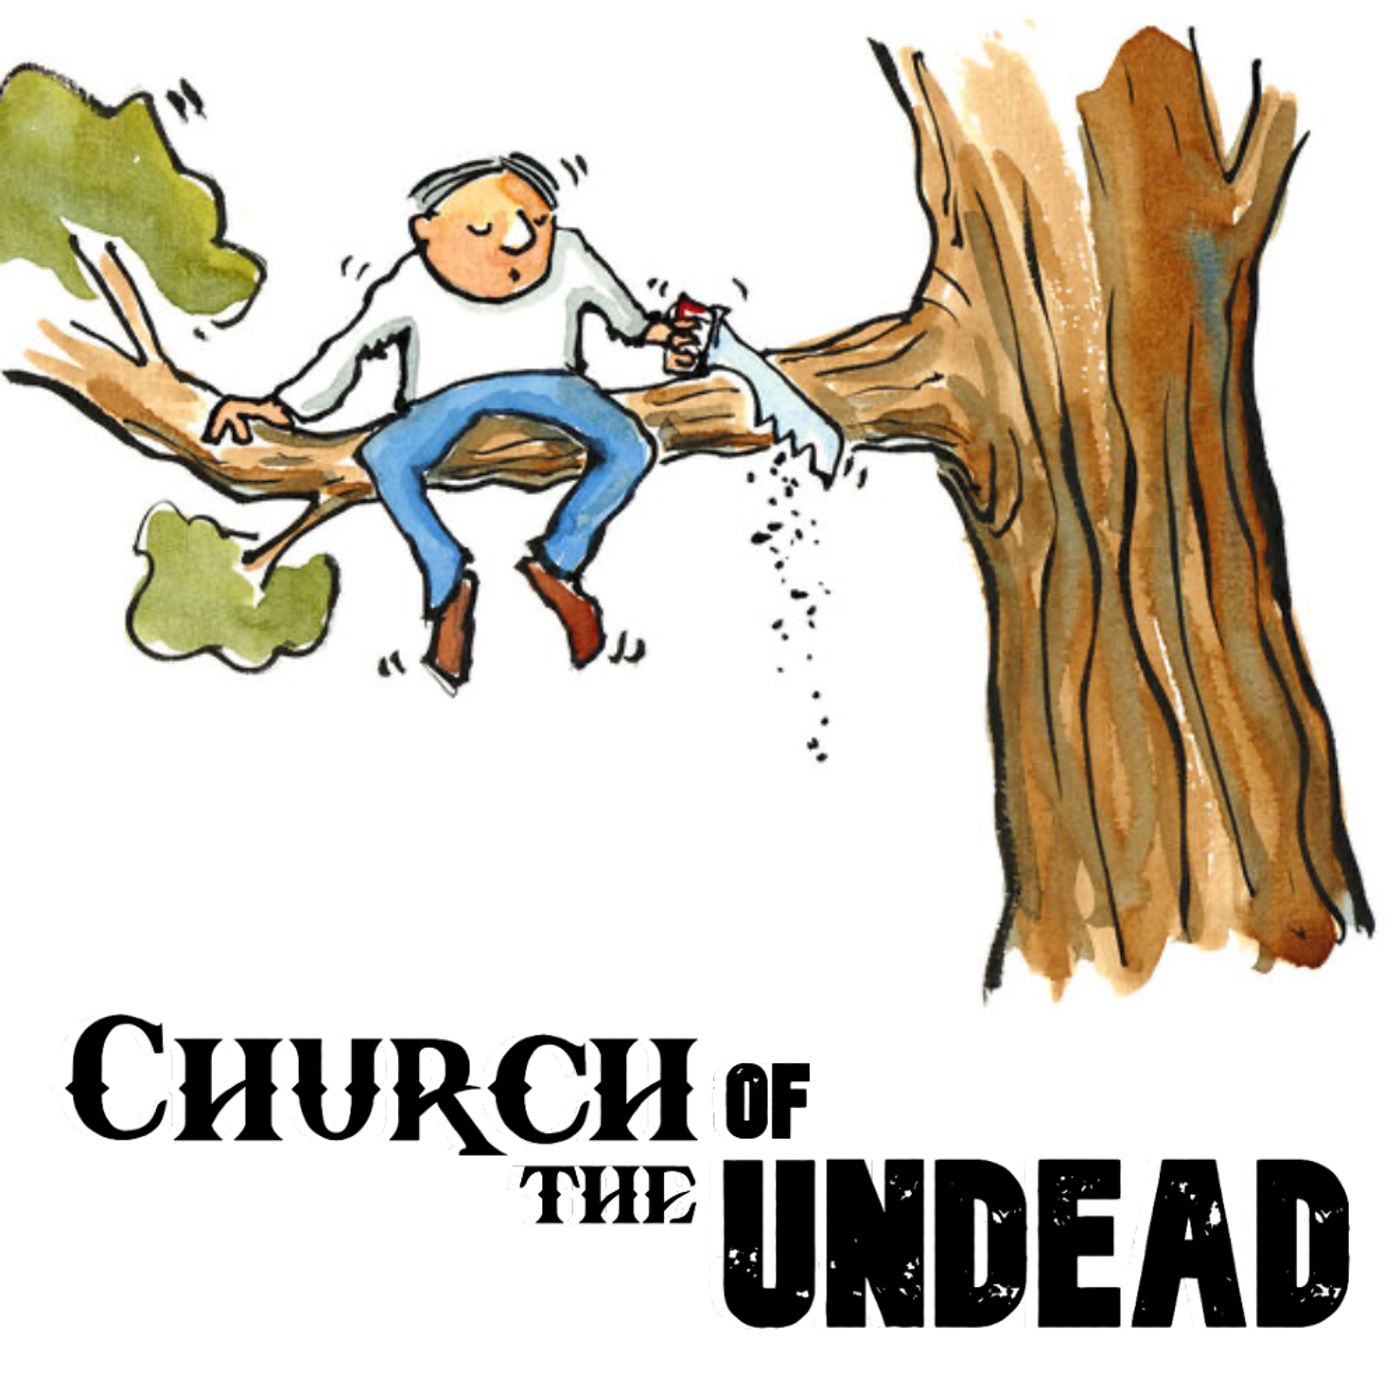 “IS YOUR DEFEAT YOUR FAULT?” #ChurchOfTheUndead